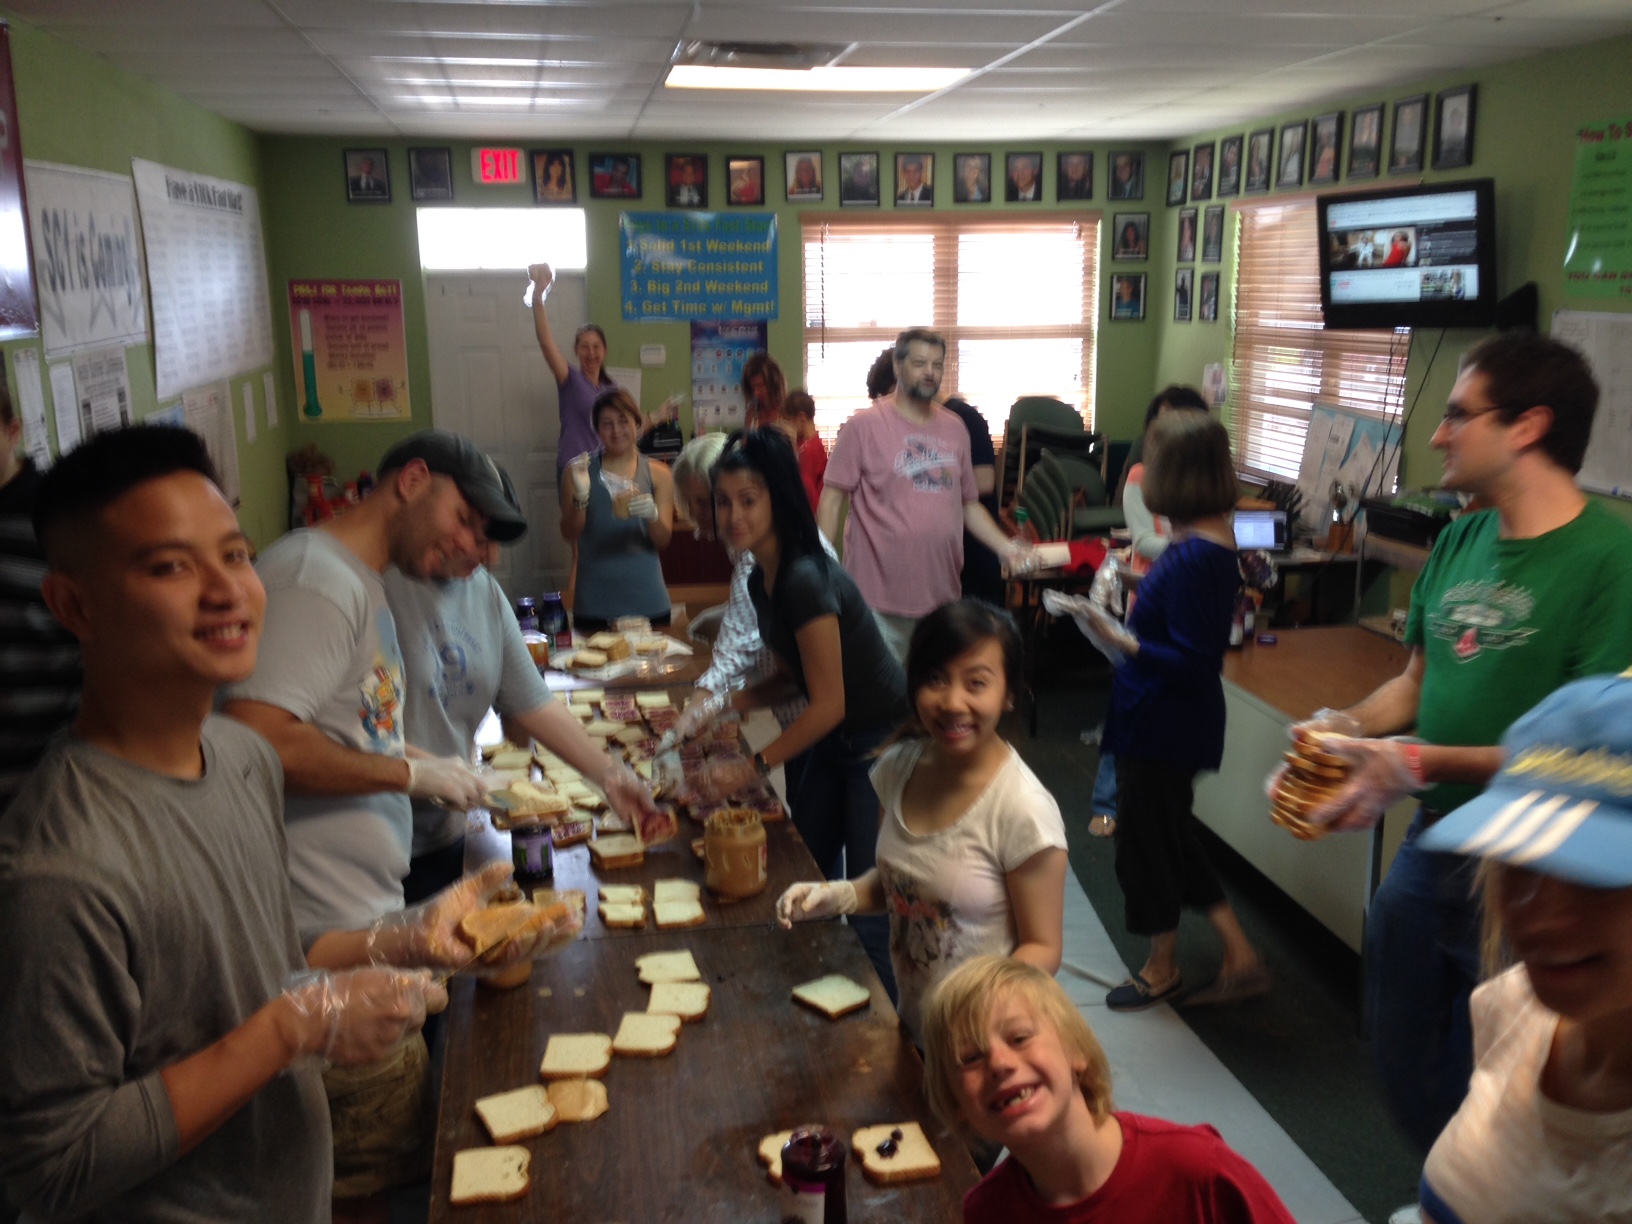 More than 100 volunteers have helped make sandwiches at PB&J for Tampa Bay Feeding Frenzies. Pictured are just a few of those volunteers May 2016 in Largo, Florida.